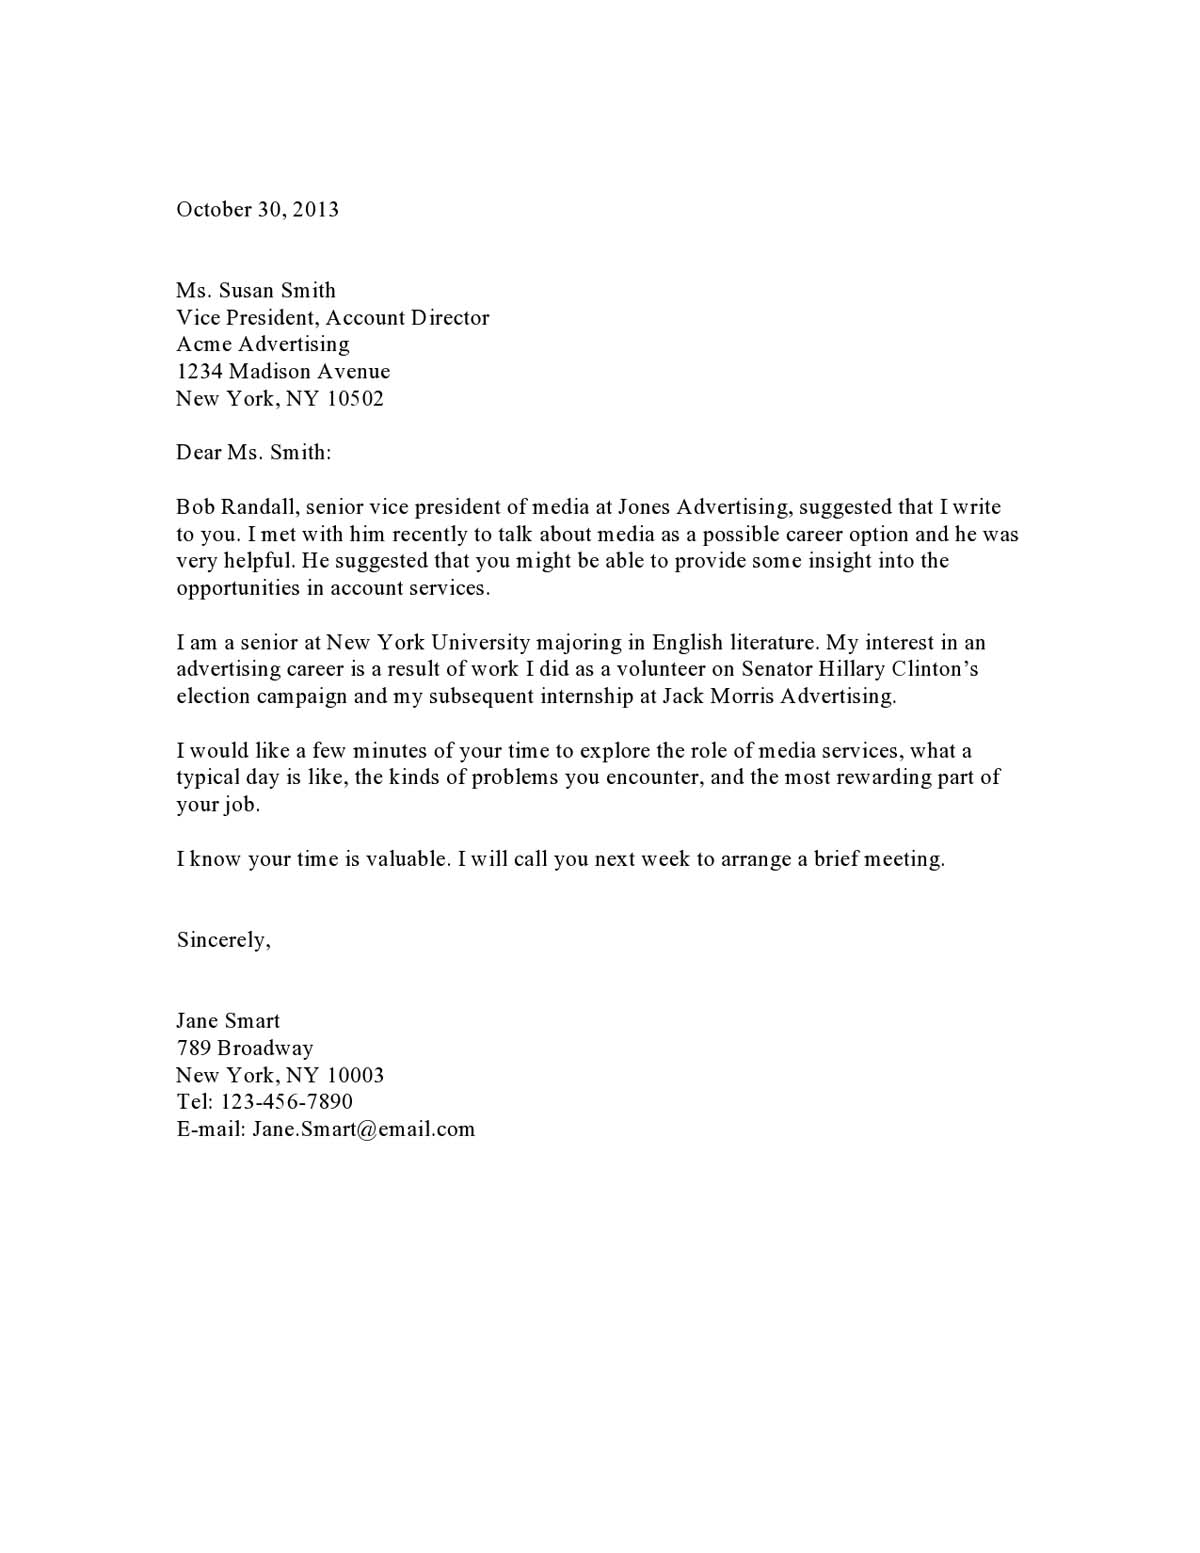 Letter Of Referral Colona.rsd7 Throughout Job Referral Email Template